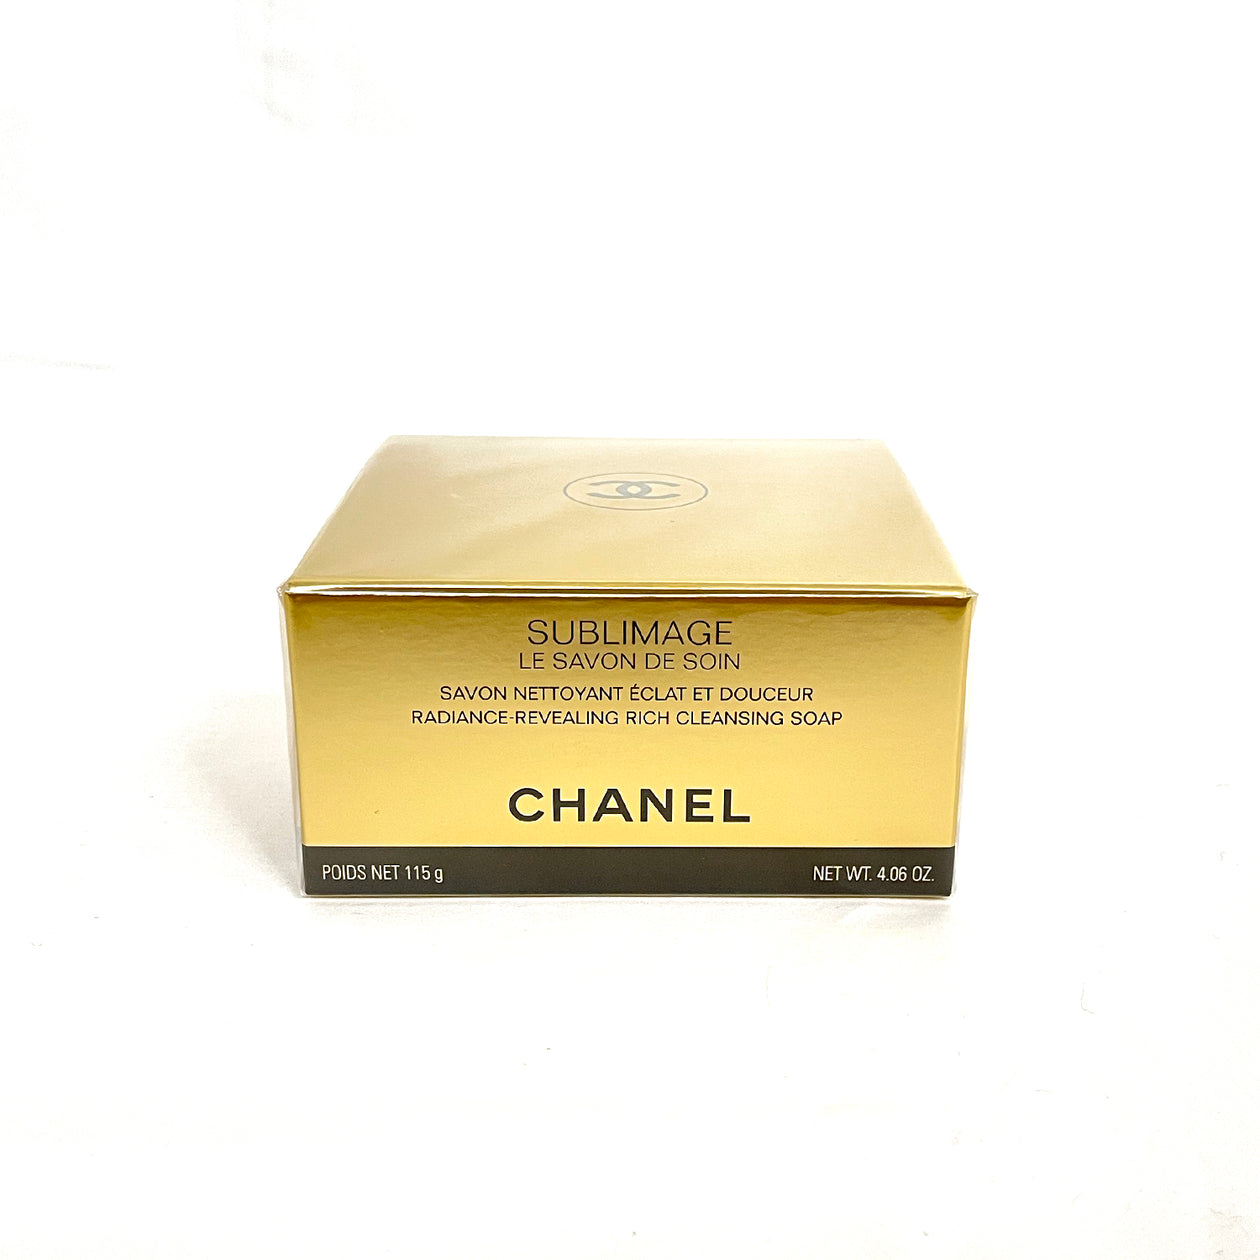 Chanel Sublimage Radiance Revealing Rich Cleansing Soap – Loop